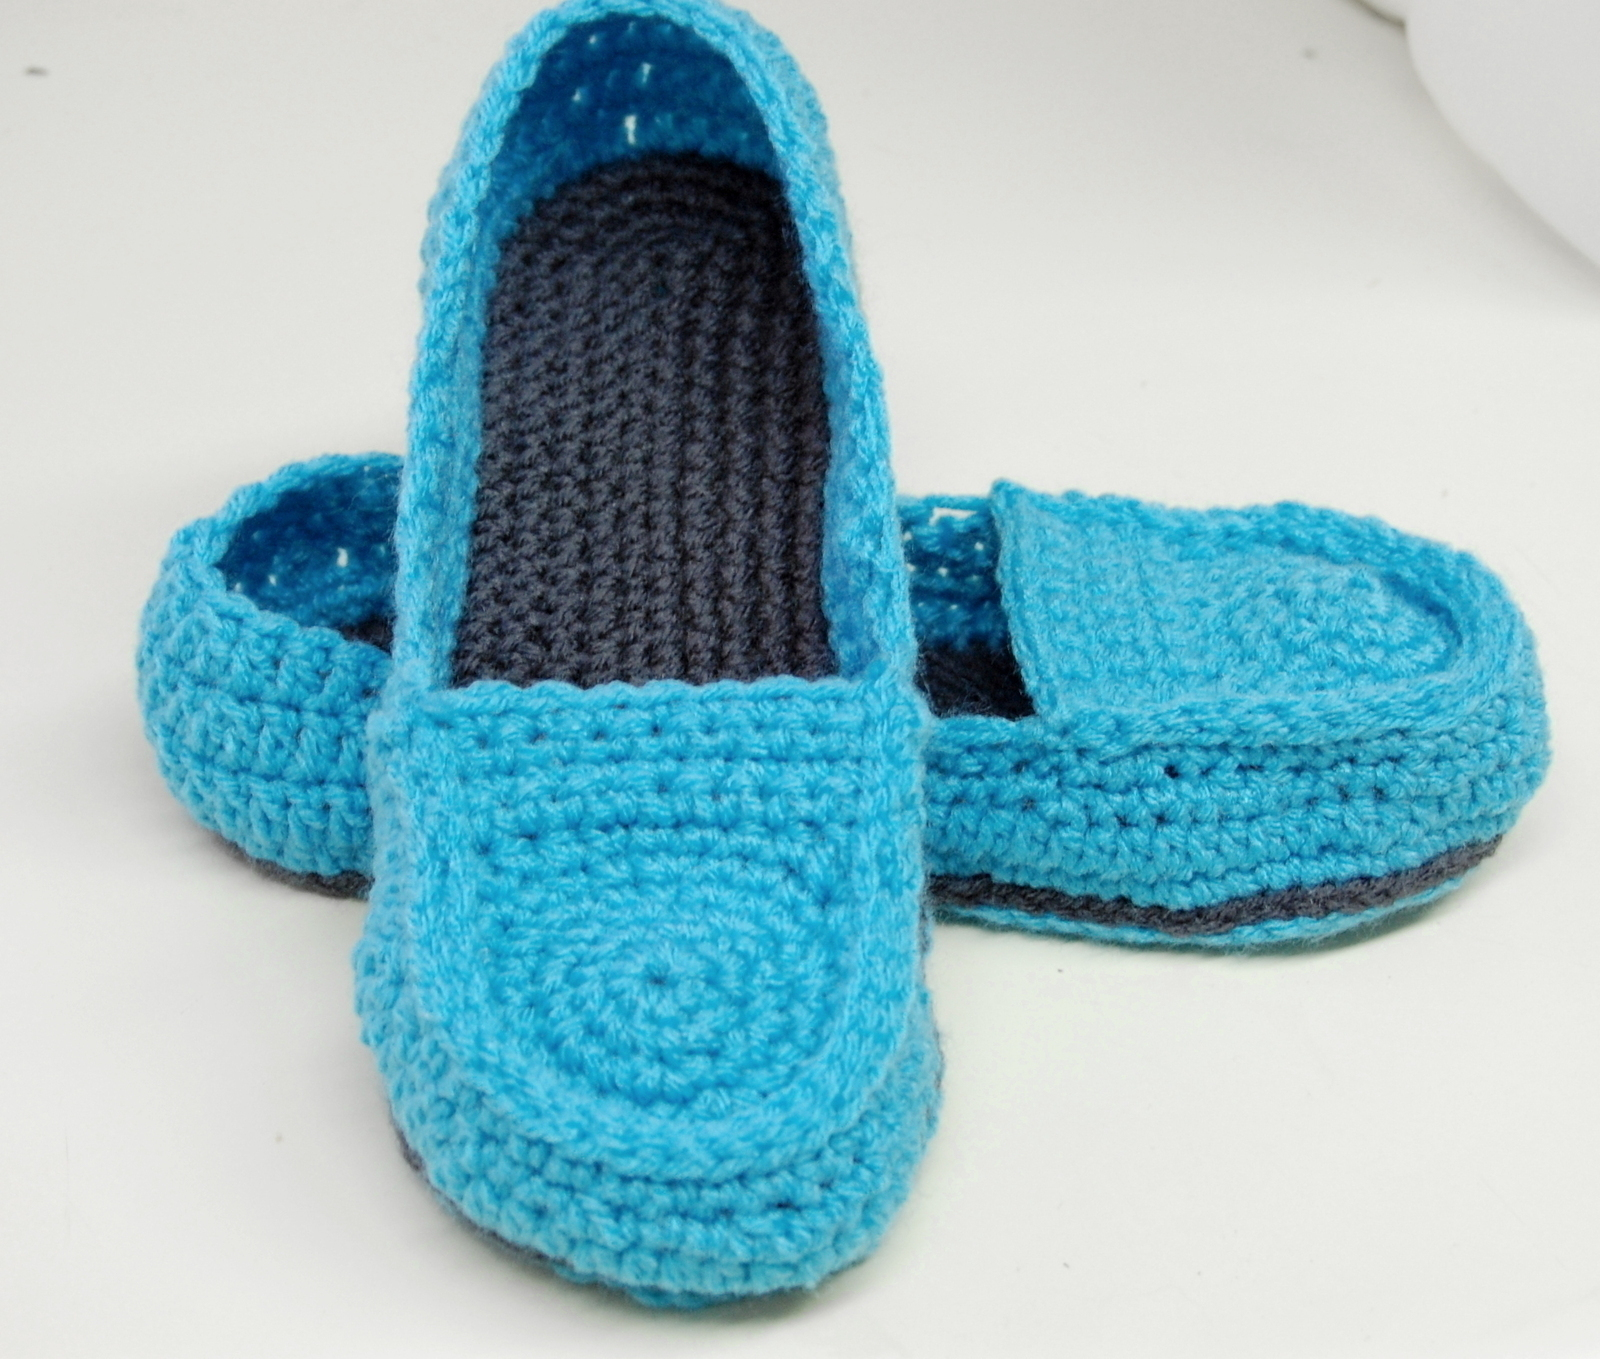 Crochet Slippers Pattern Free Free Crochet Pattern Womens Loafer Slippers A Pair Of Knit Or